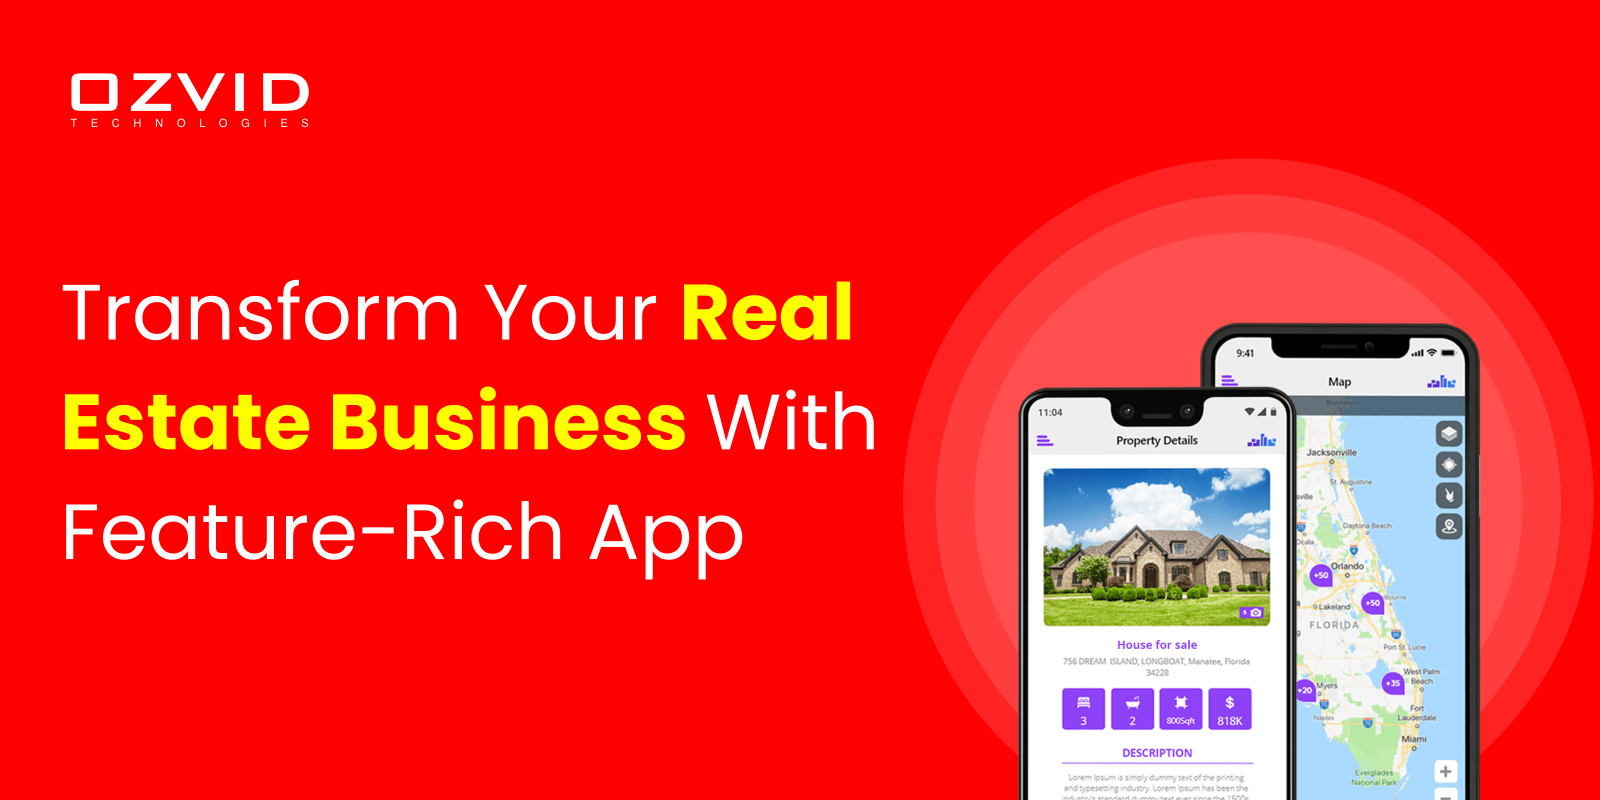 How to Transform your Real Estate Business with Feature-Rich Application?